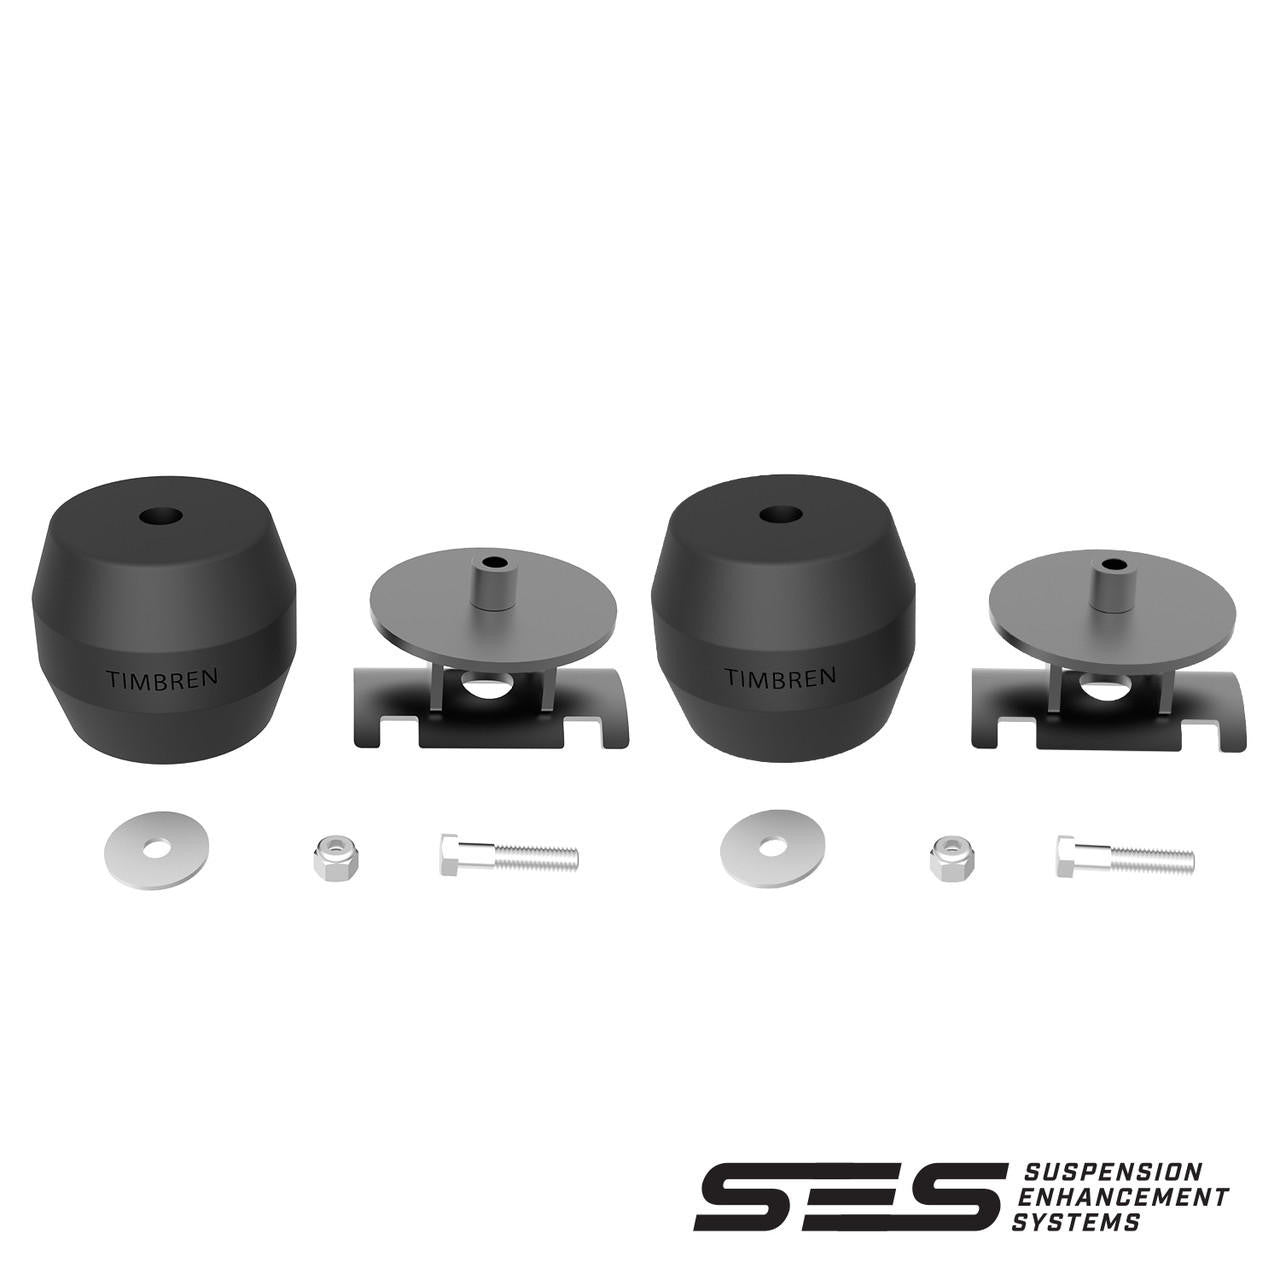 Timbren SES Spring Under Axle Configuration Trailer Kit Timbren SES Suspension Enhancement System TRABL 